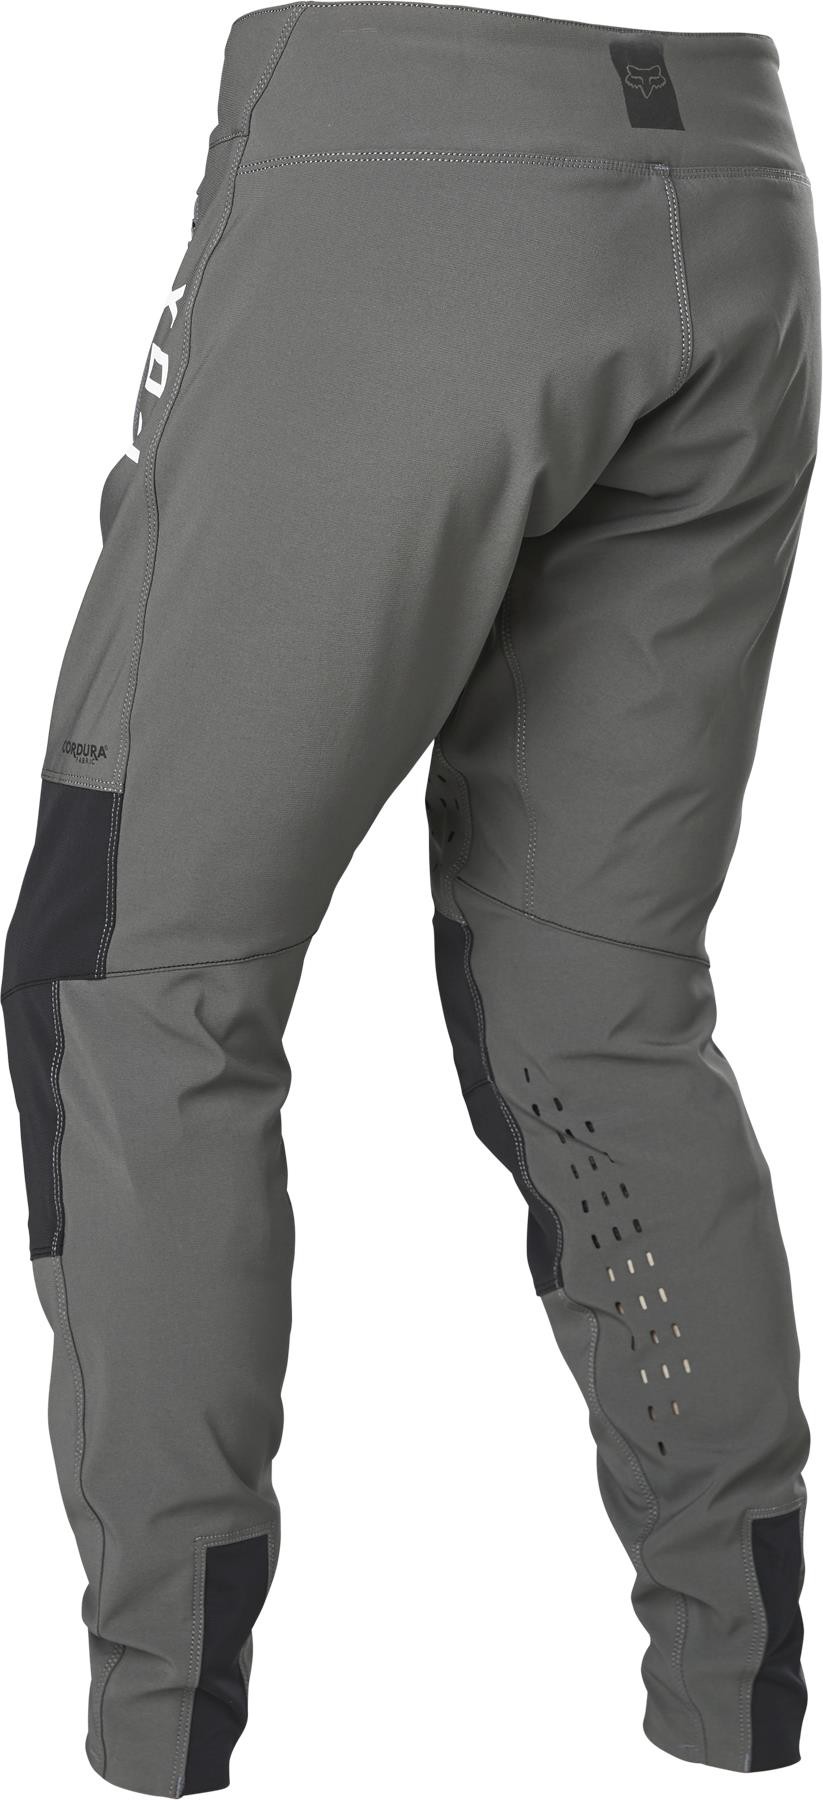 Defend Womens MTB Cycling Trousers image 1